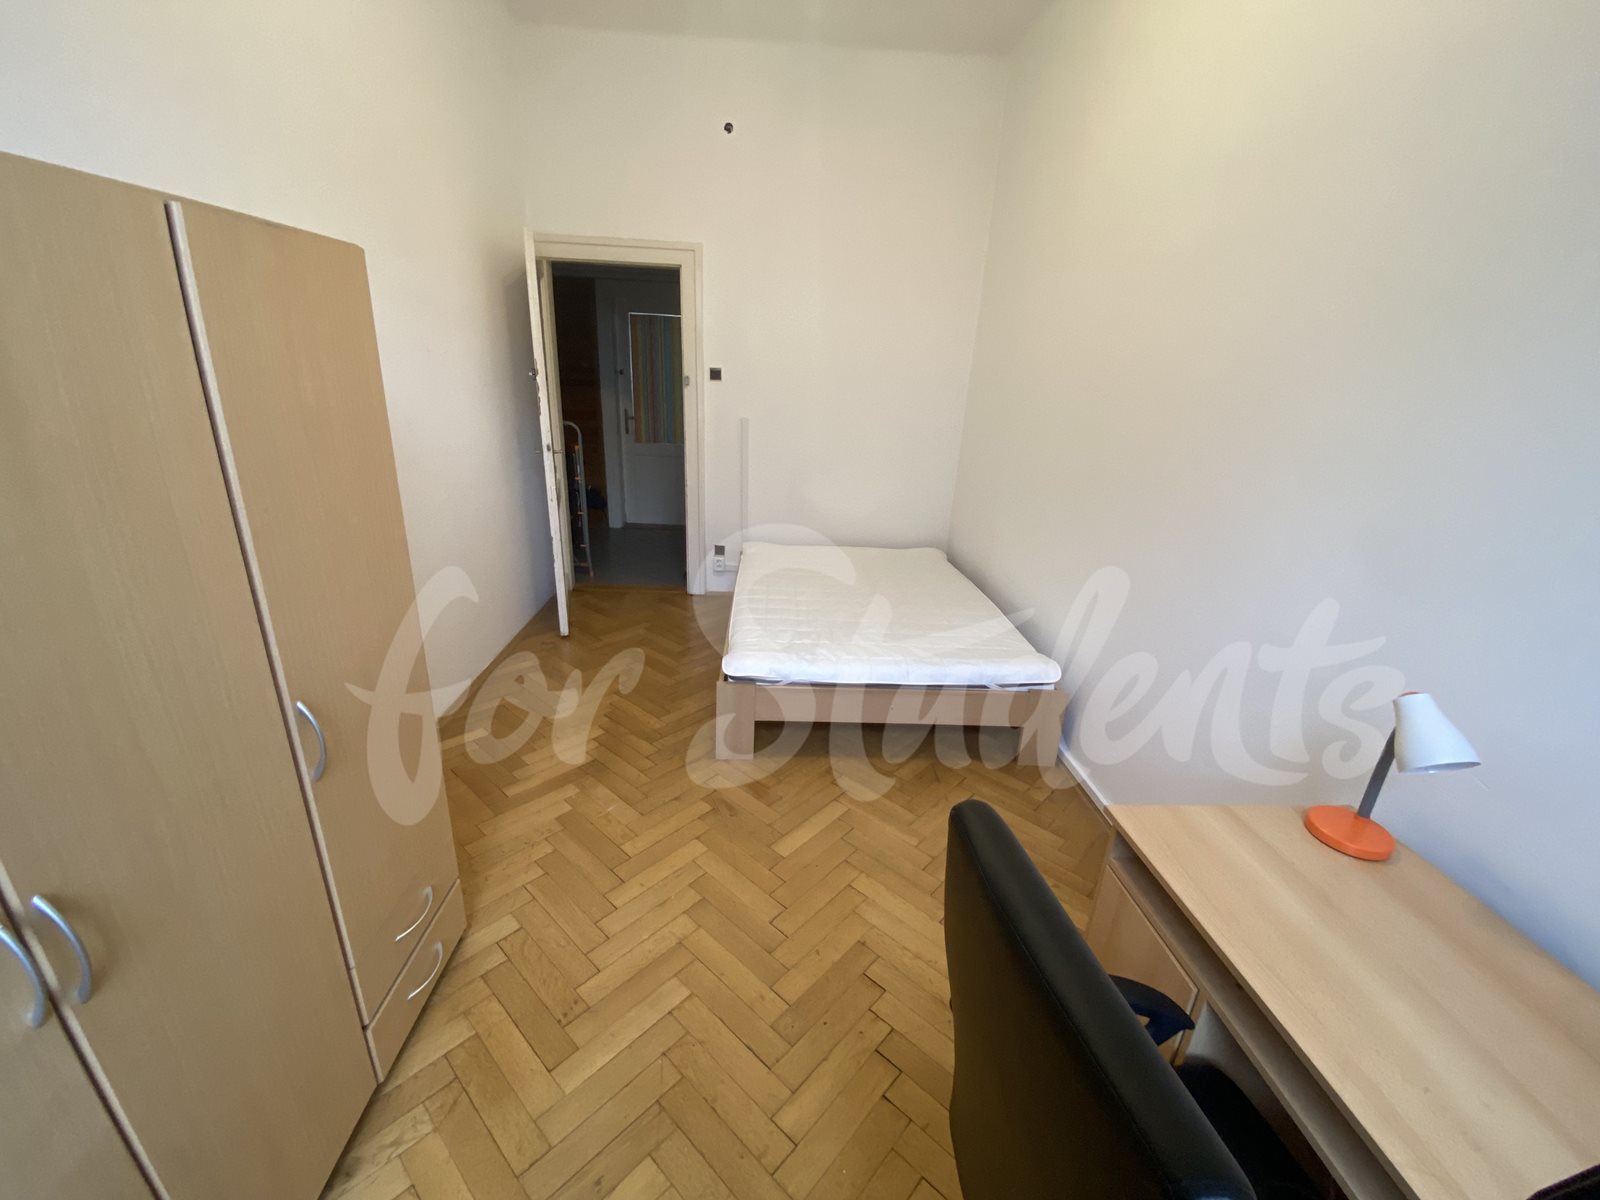 One bedroom available in female three bedroom apartment, Hradec Králové